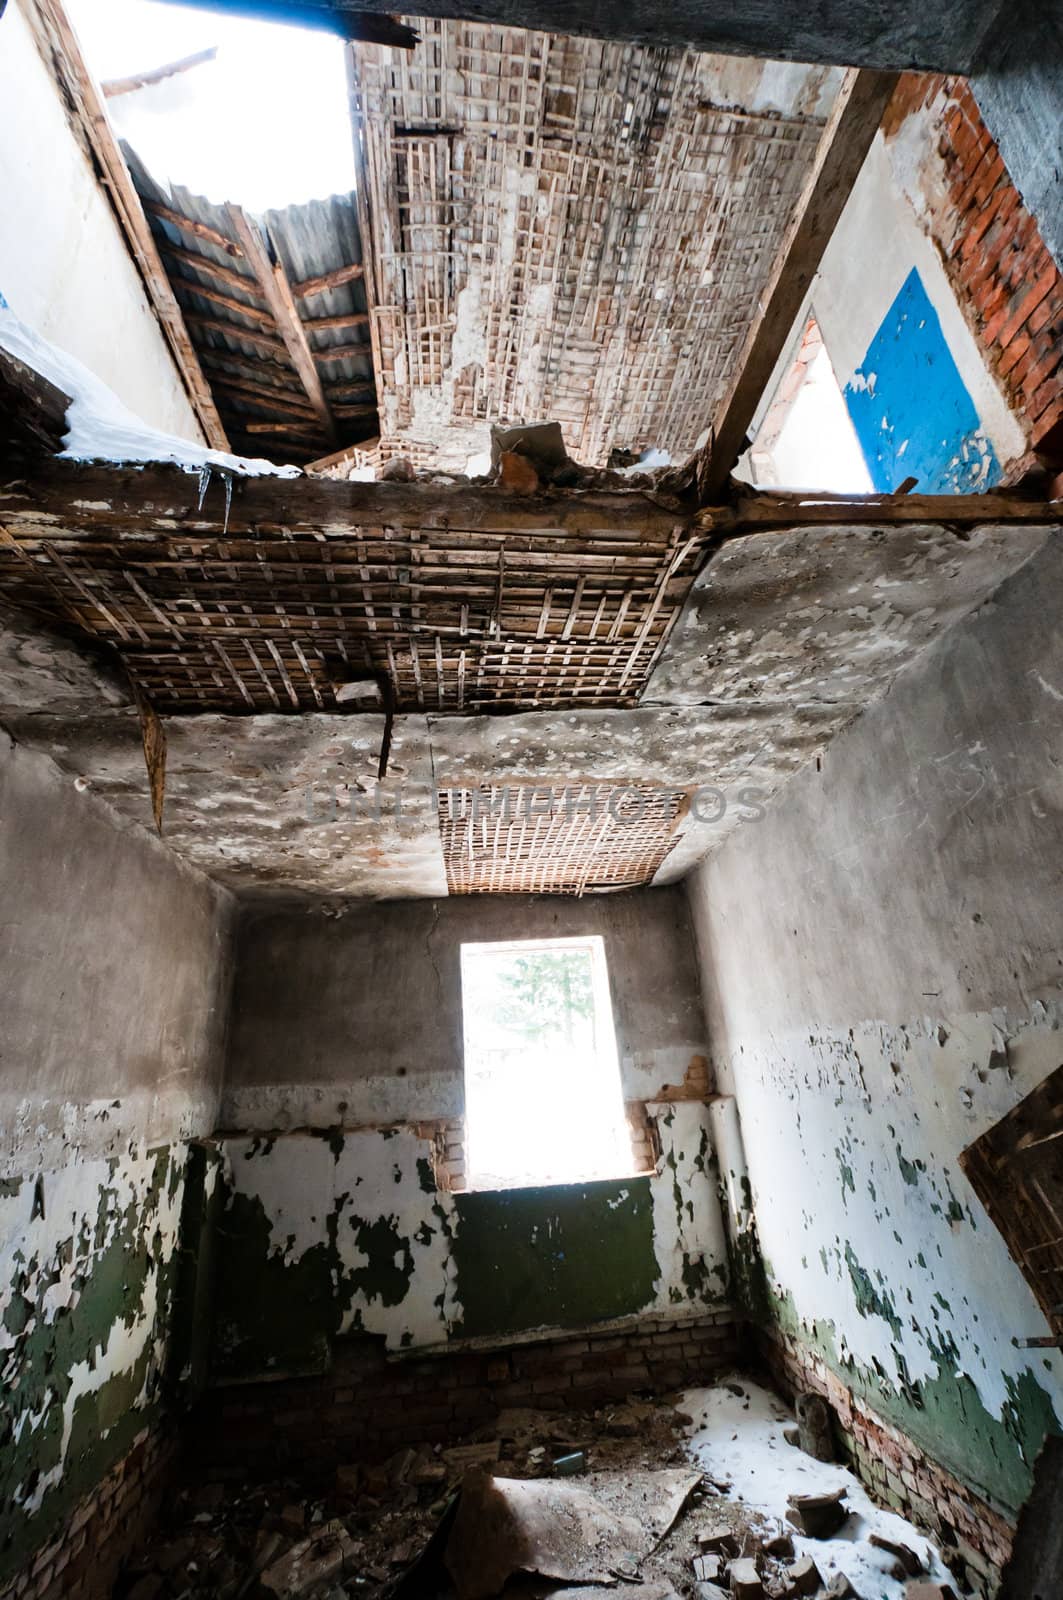 Broken and dirty room in old abandoned house, grungy composition